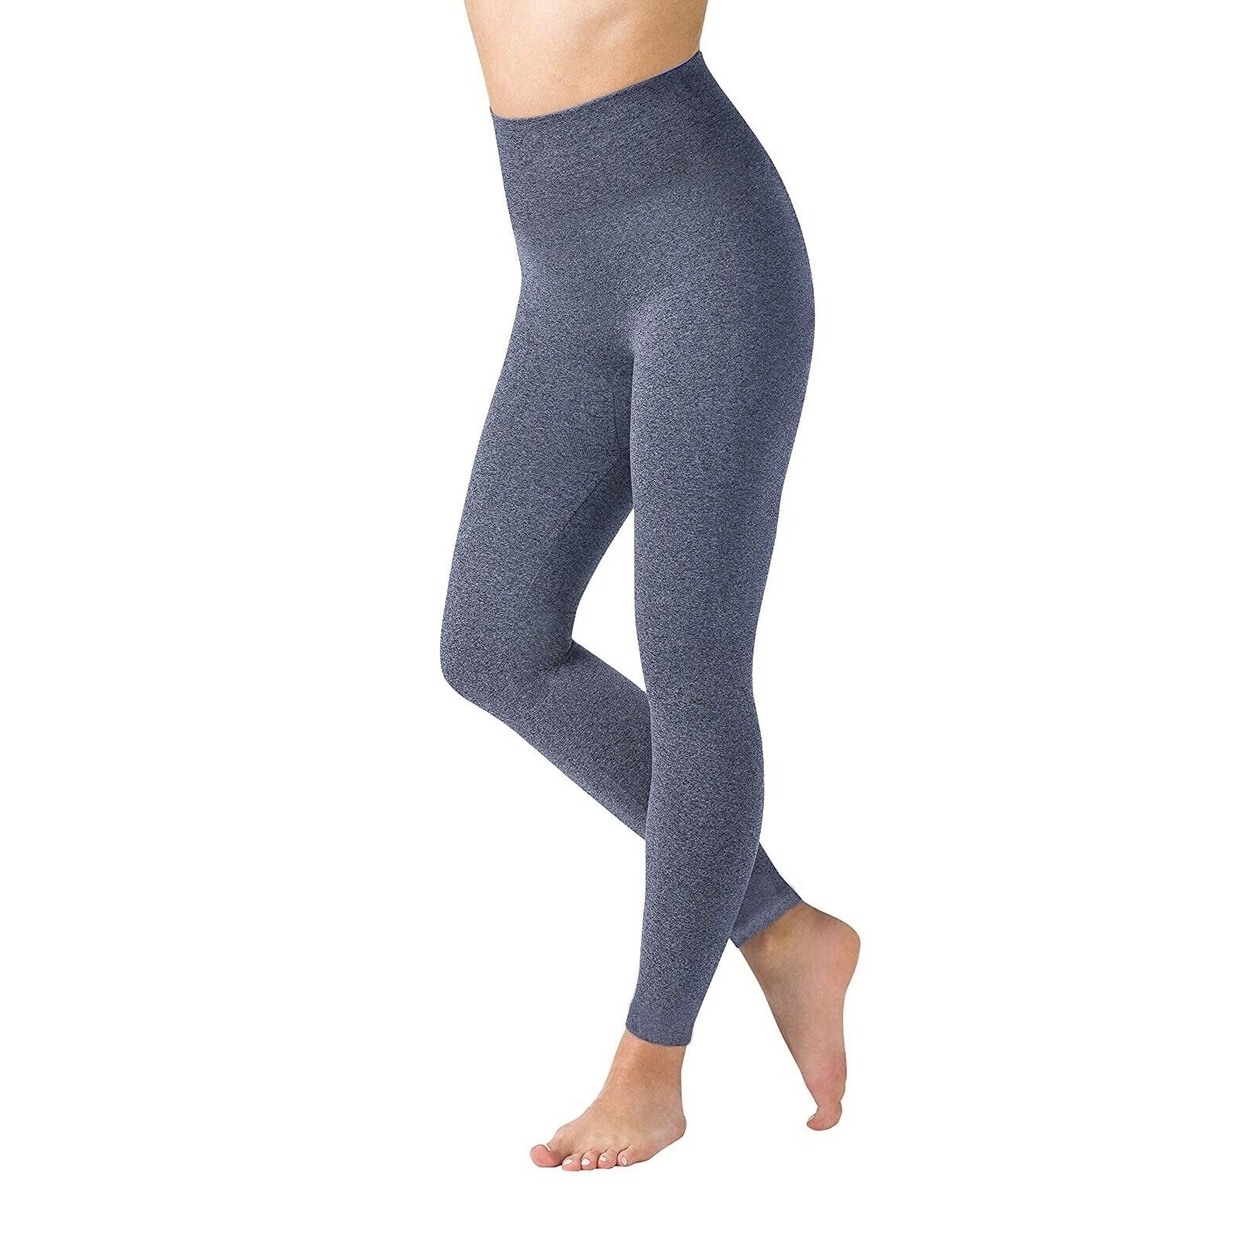 Multi-Packs Women High Waisted Fleece Lined Marled Leggings Ultra Soft Warm Pant - Charcoal/navy, 1, 1x